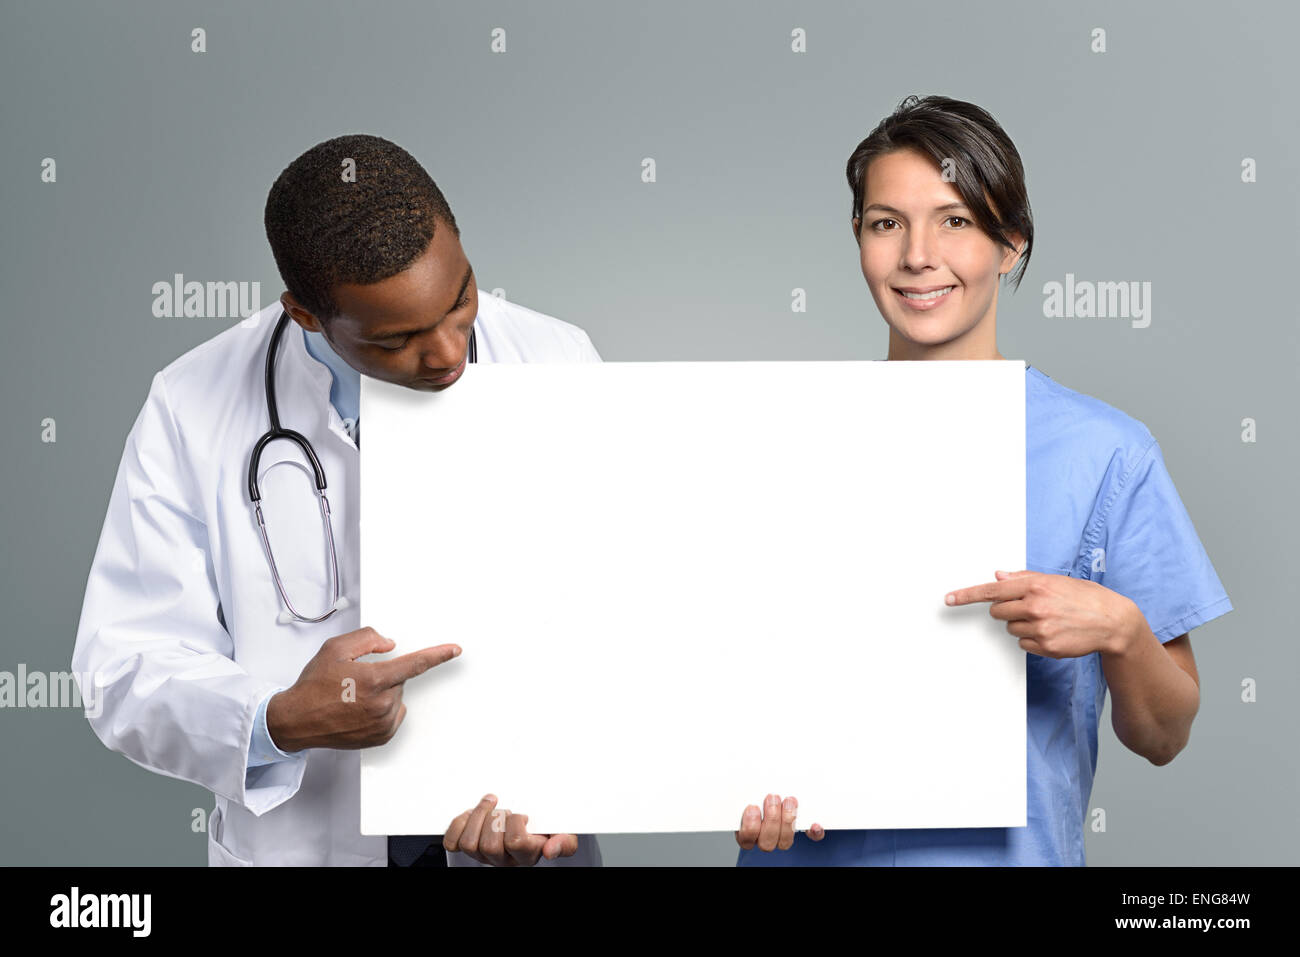 Multiethnic medical team of an African doctor in a lab coat and stethoscope and a nurse in scrubs holding a blank white sign Stock Photo